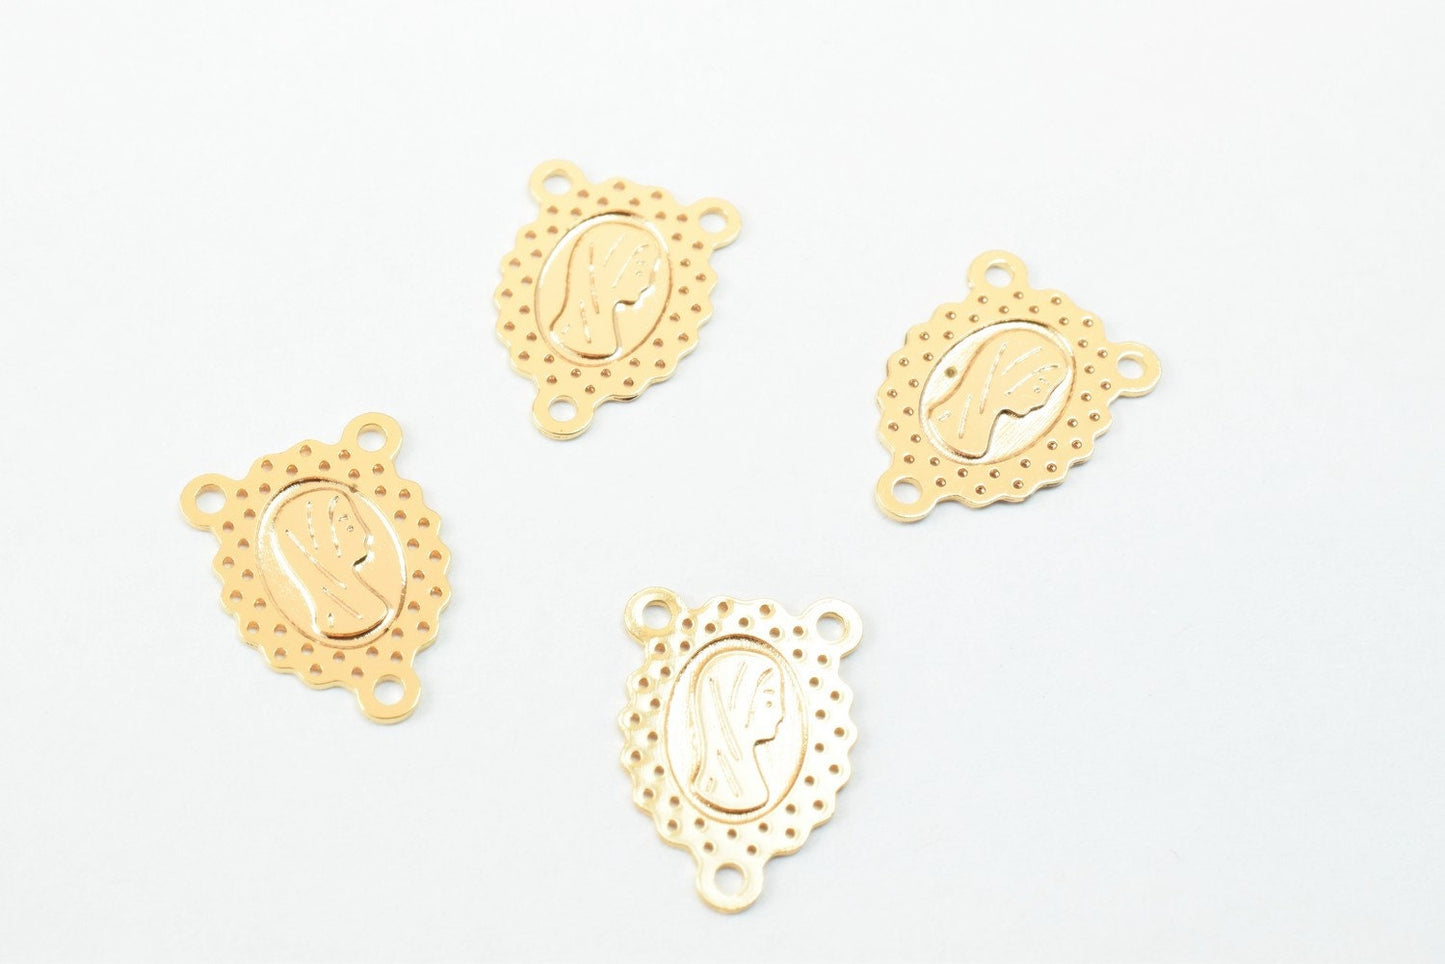 6PC Dainty Thin 18K Pinky Gold Filled Filigree Saint Mary Center Of Rossery Connector Size 15x10mm Thickness 0.25mm For Jewelry Making DGF12